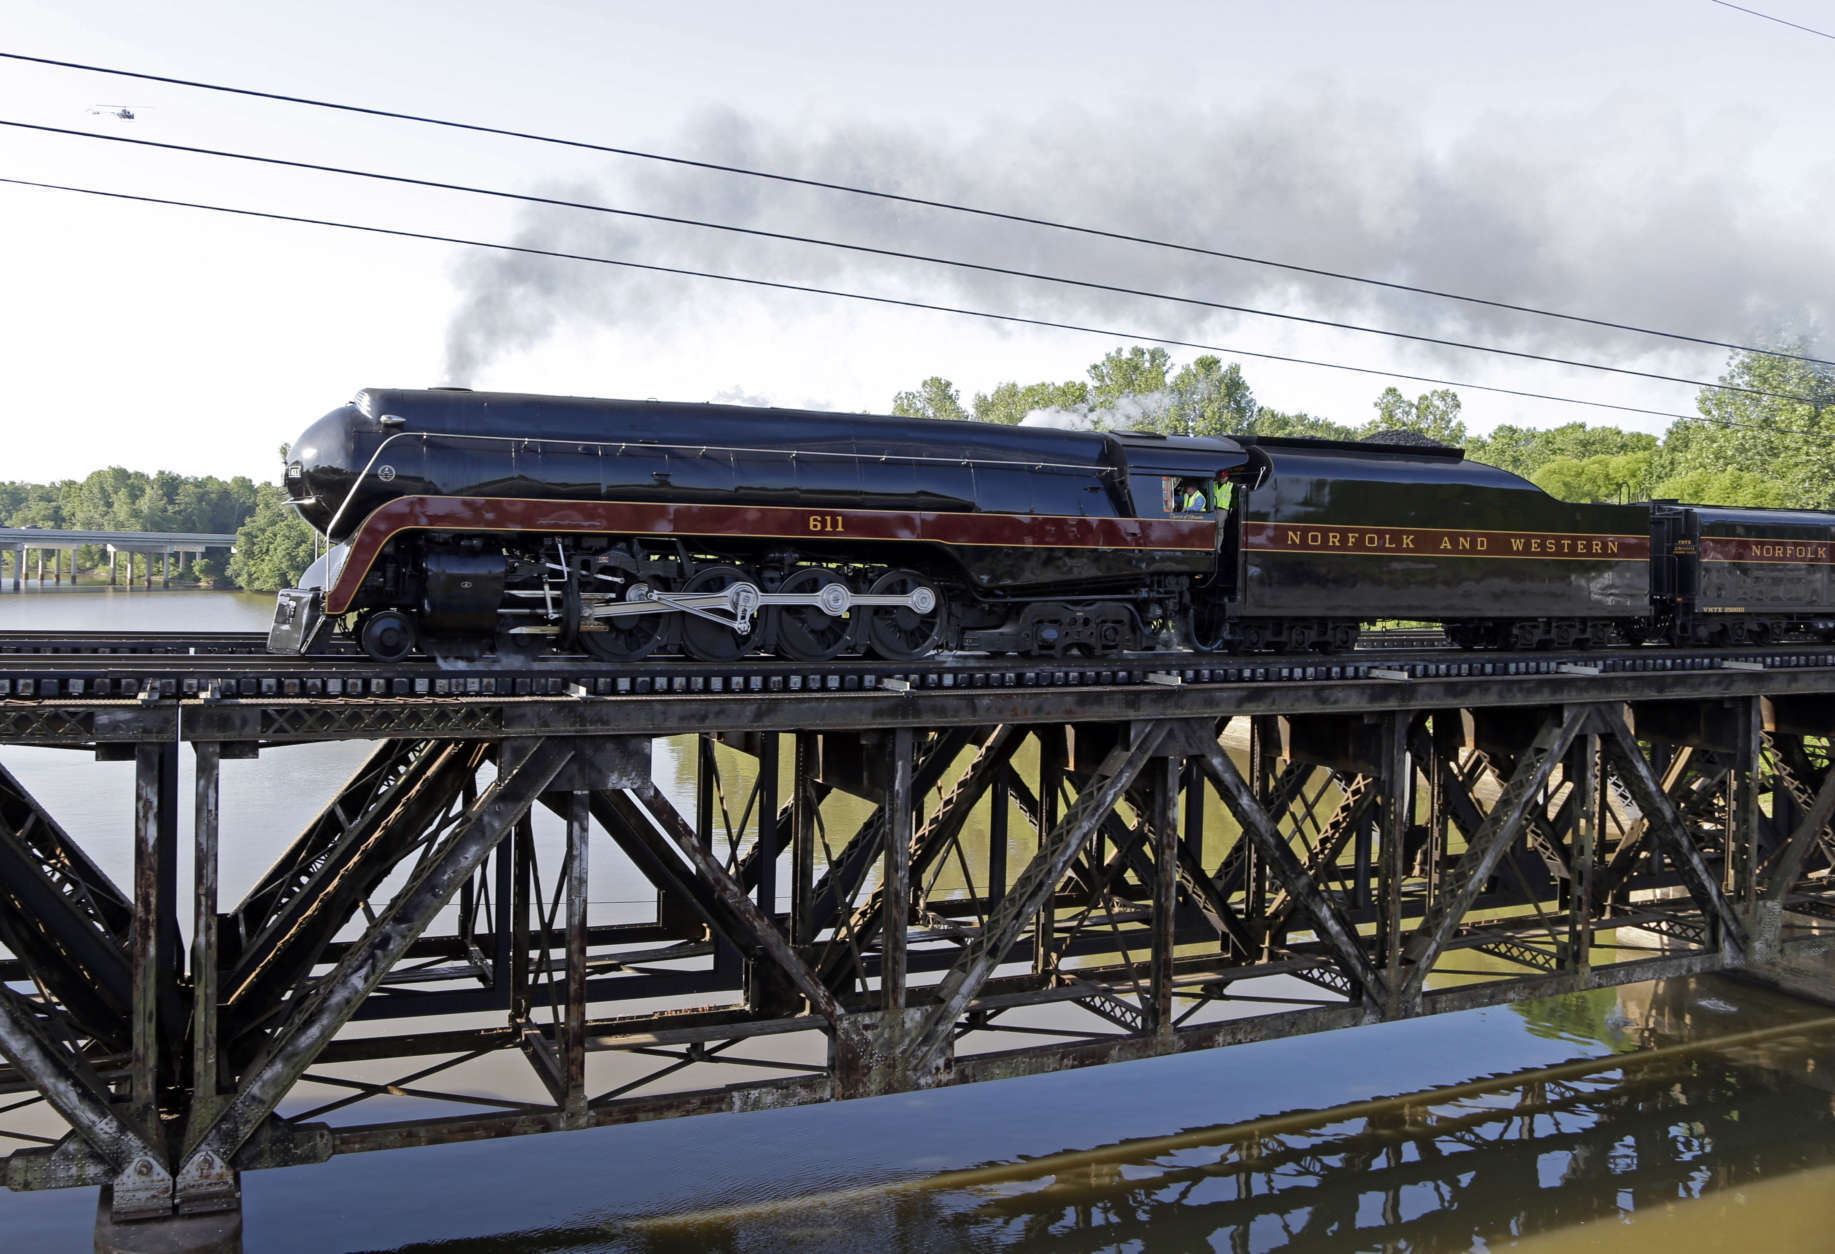 The Norfolk &amp; Western Class J No. 611 steam locomotive crosses a bridge over the Yadkin River after leaving the North Carolina Transportation Museum in Spencer, N.C., Saturday, May 30, 2015. The train, which has undergone a year-long restoration, is returning to the Virginia Museum of Transportation in Roanoke, Virginia. (AP Photo/Chuck Burton)